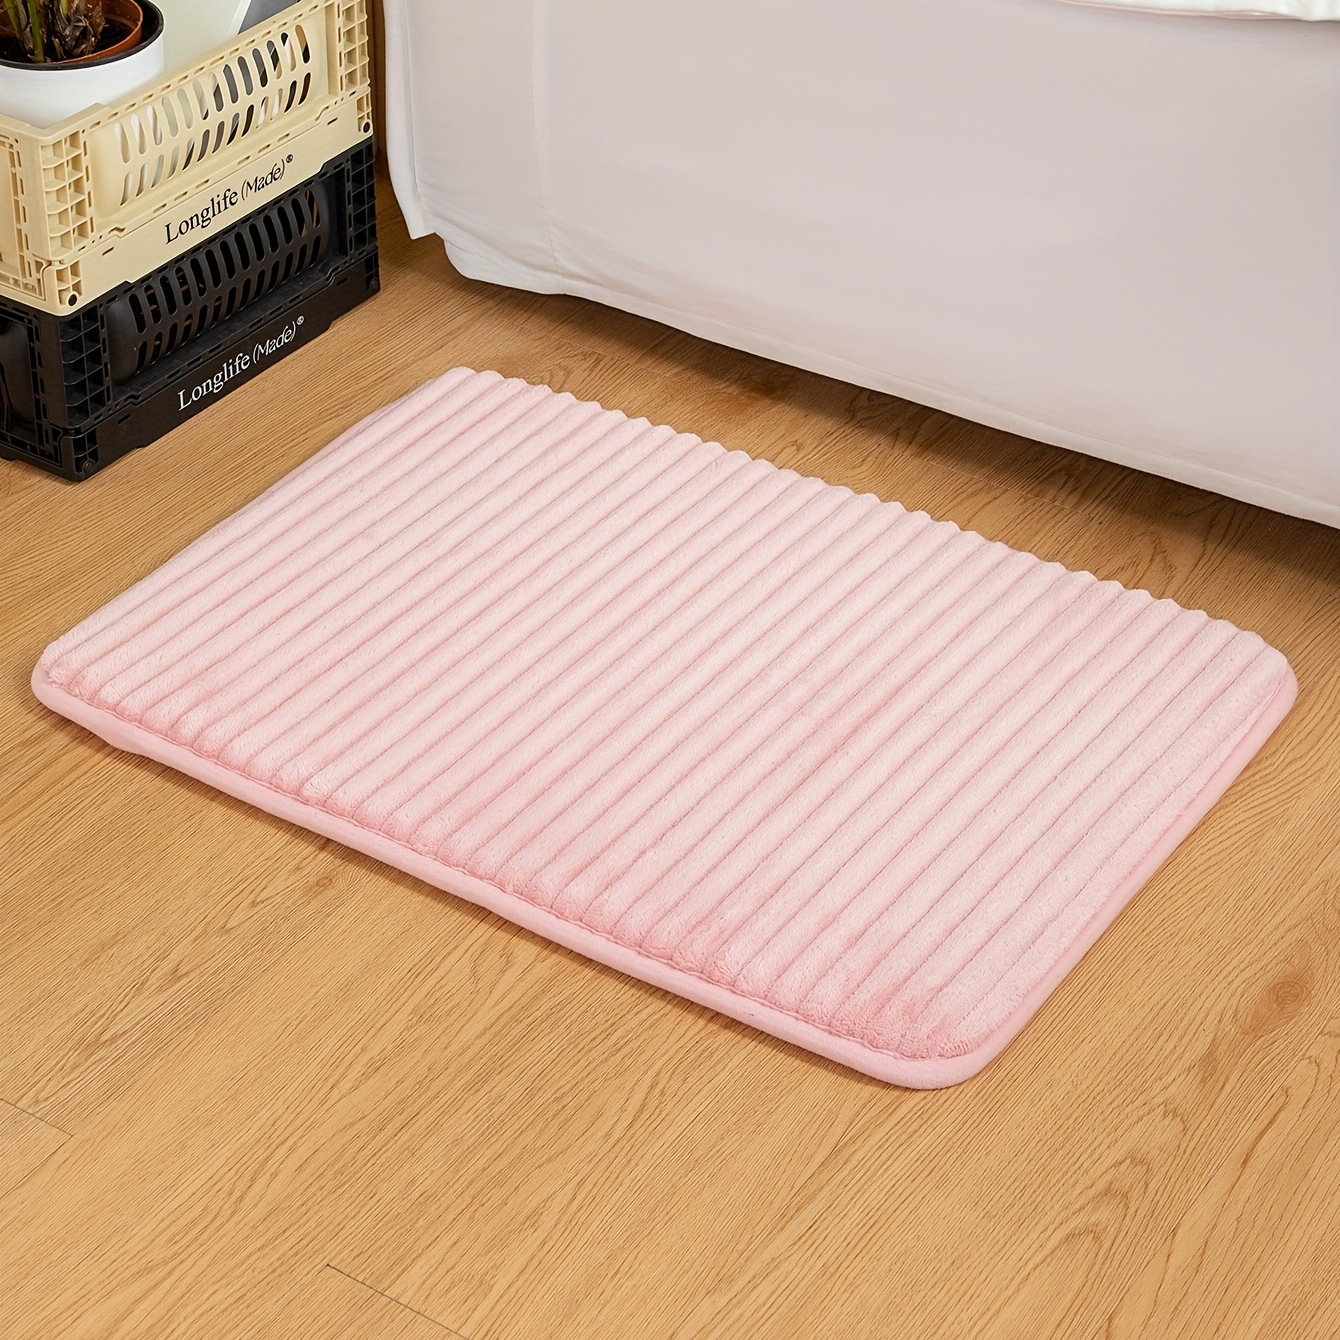 1pc Soft Flannel Area Rugs Anti Fatigue Shaggy Floor Carpet Football Print  Area Rugs Non Slip Machine Washable Carpet Entrance Welcome Door Mat Living  Room Bedroom Nursery Room Game Room Dormitory Carpet